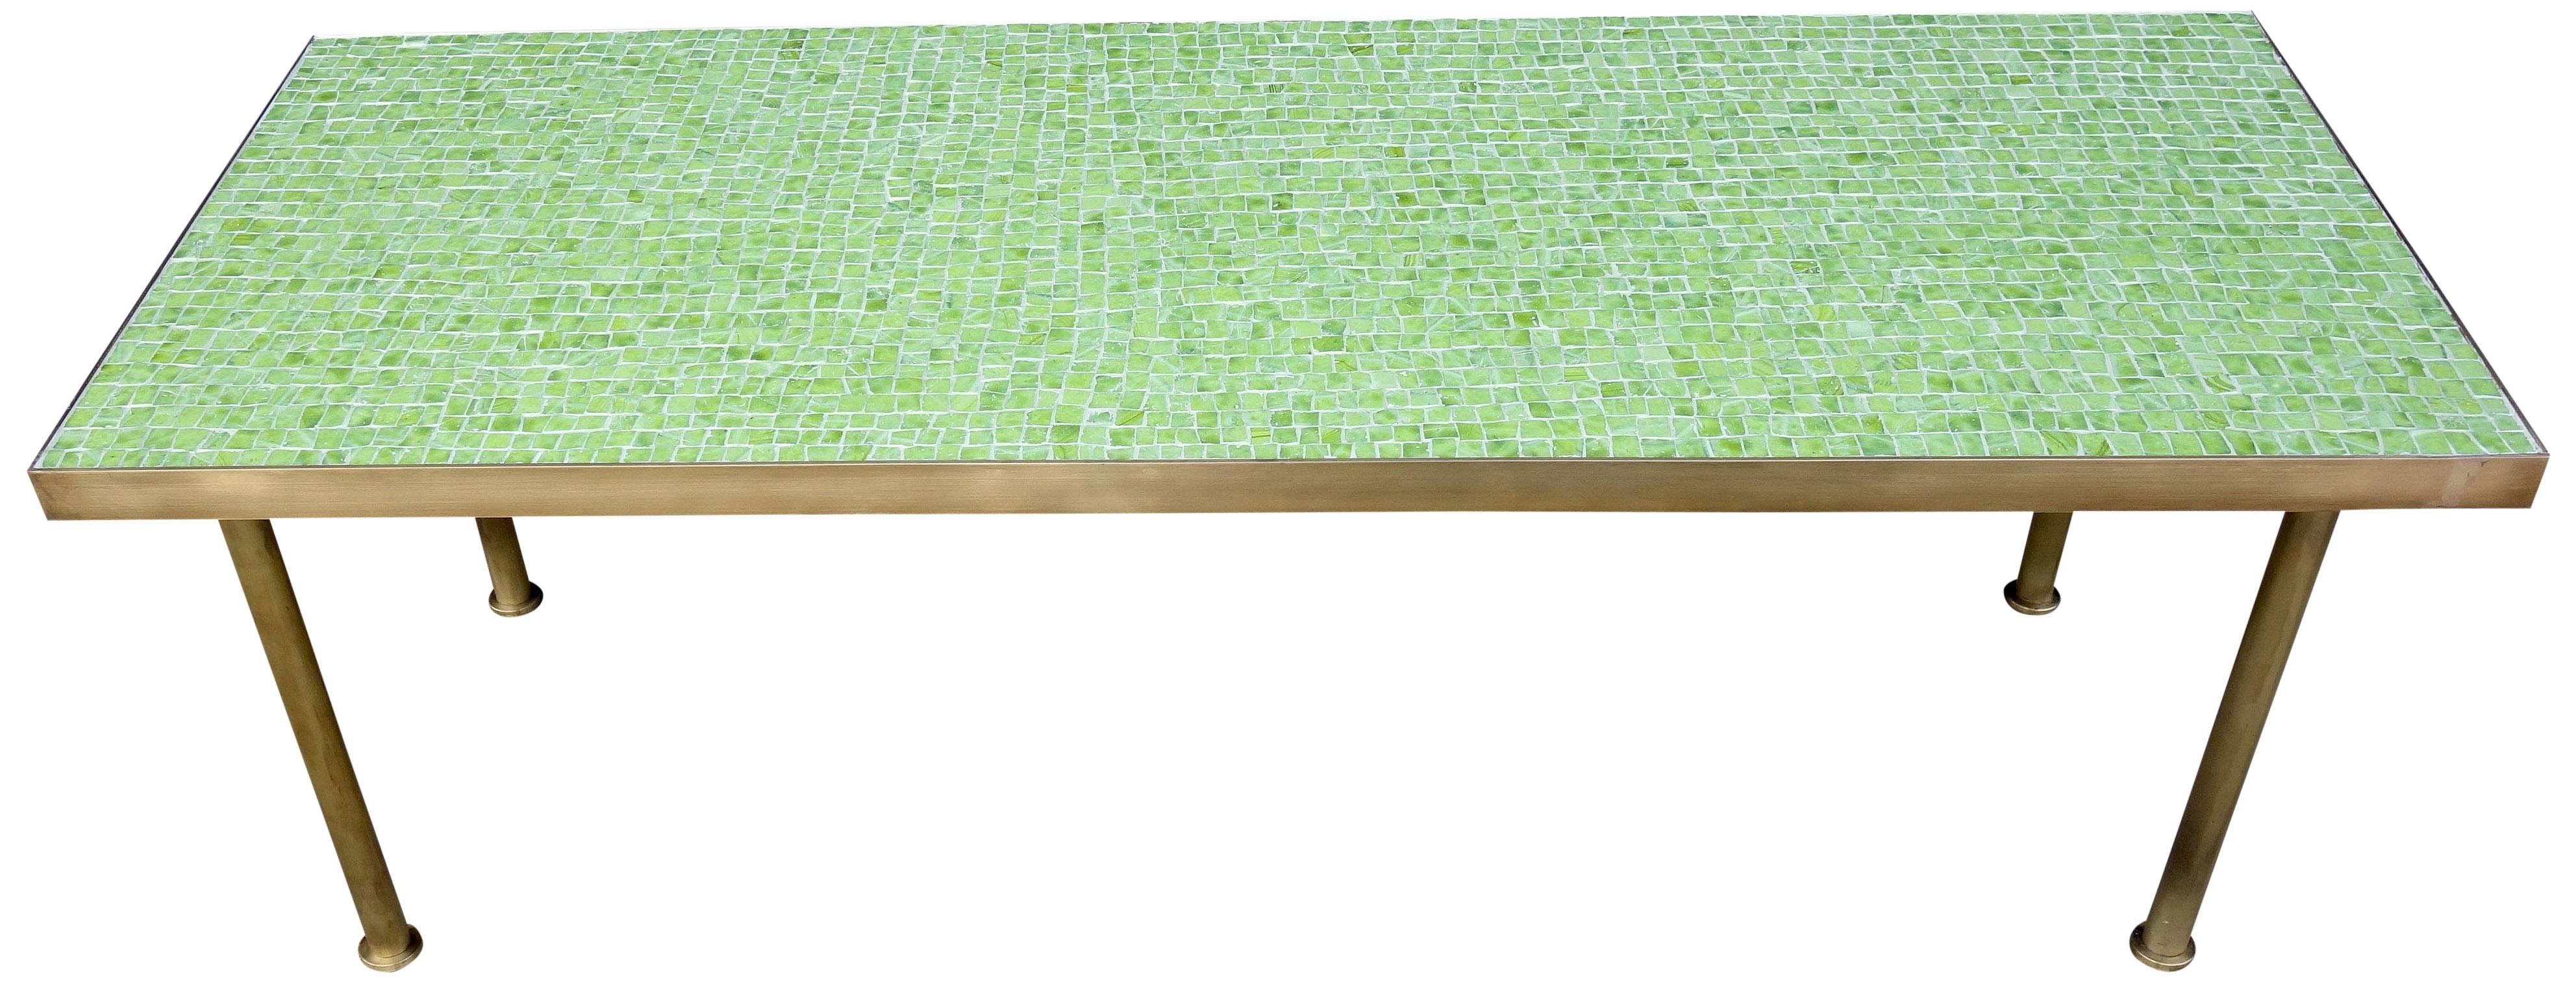 For your consideration is this beautiful smalt glass mosaic coffee table on a solid brass frame. Wonderful pistachio colored green mosaic tiles will highlight your space with a midcentury aesthetic that can match any decor.